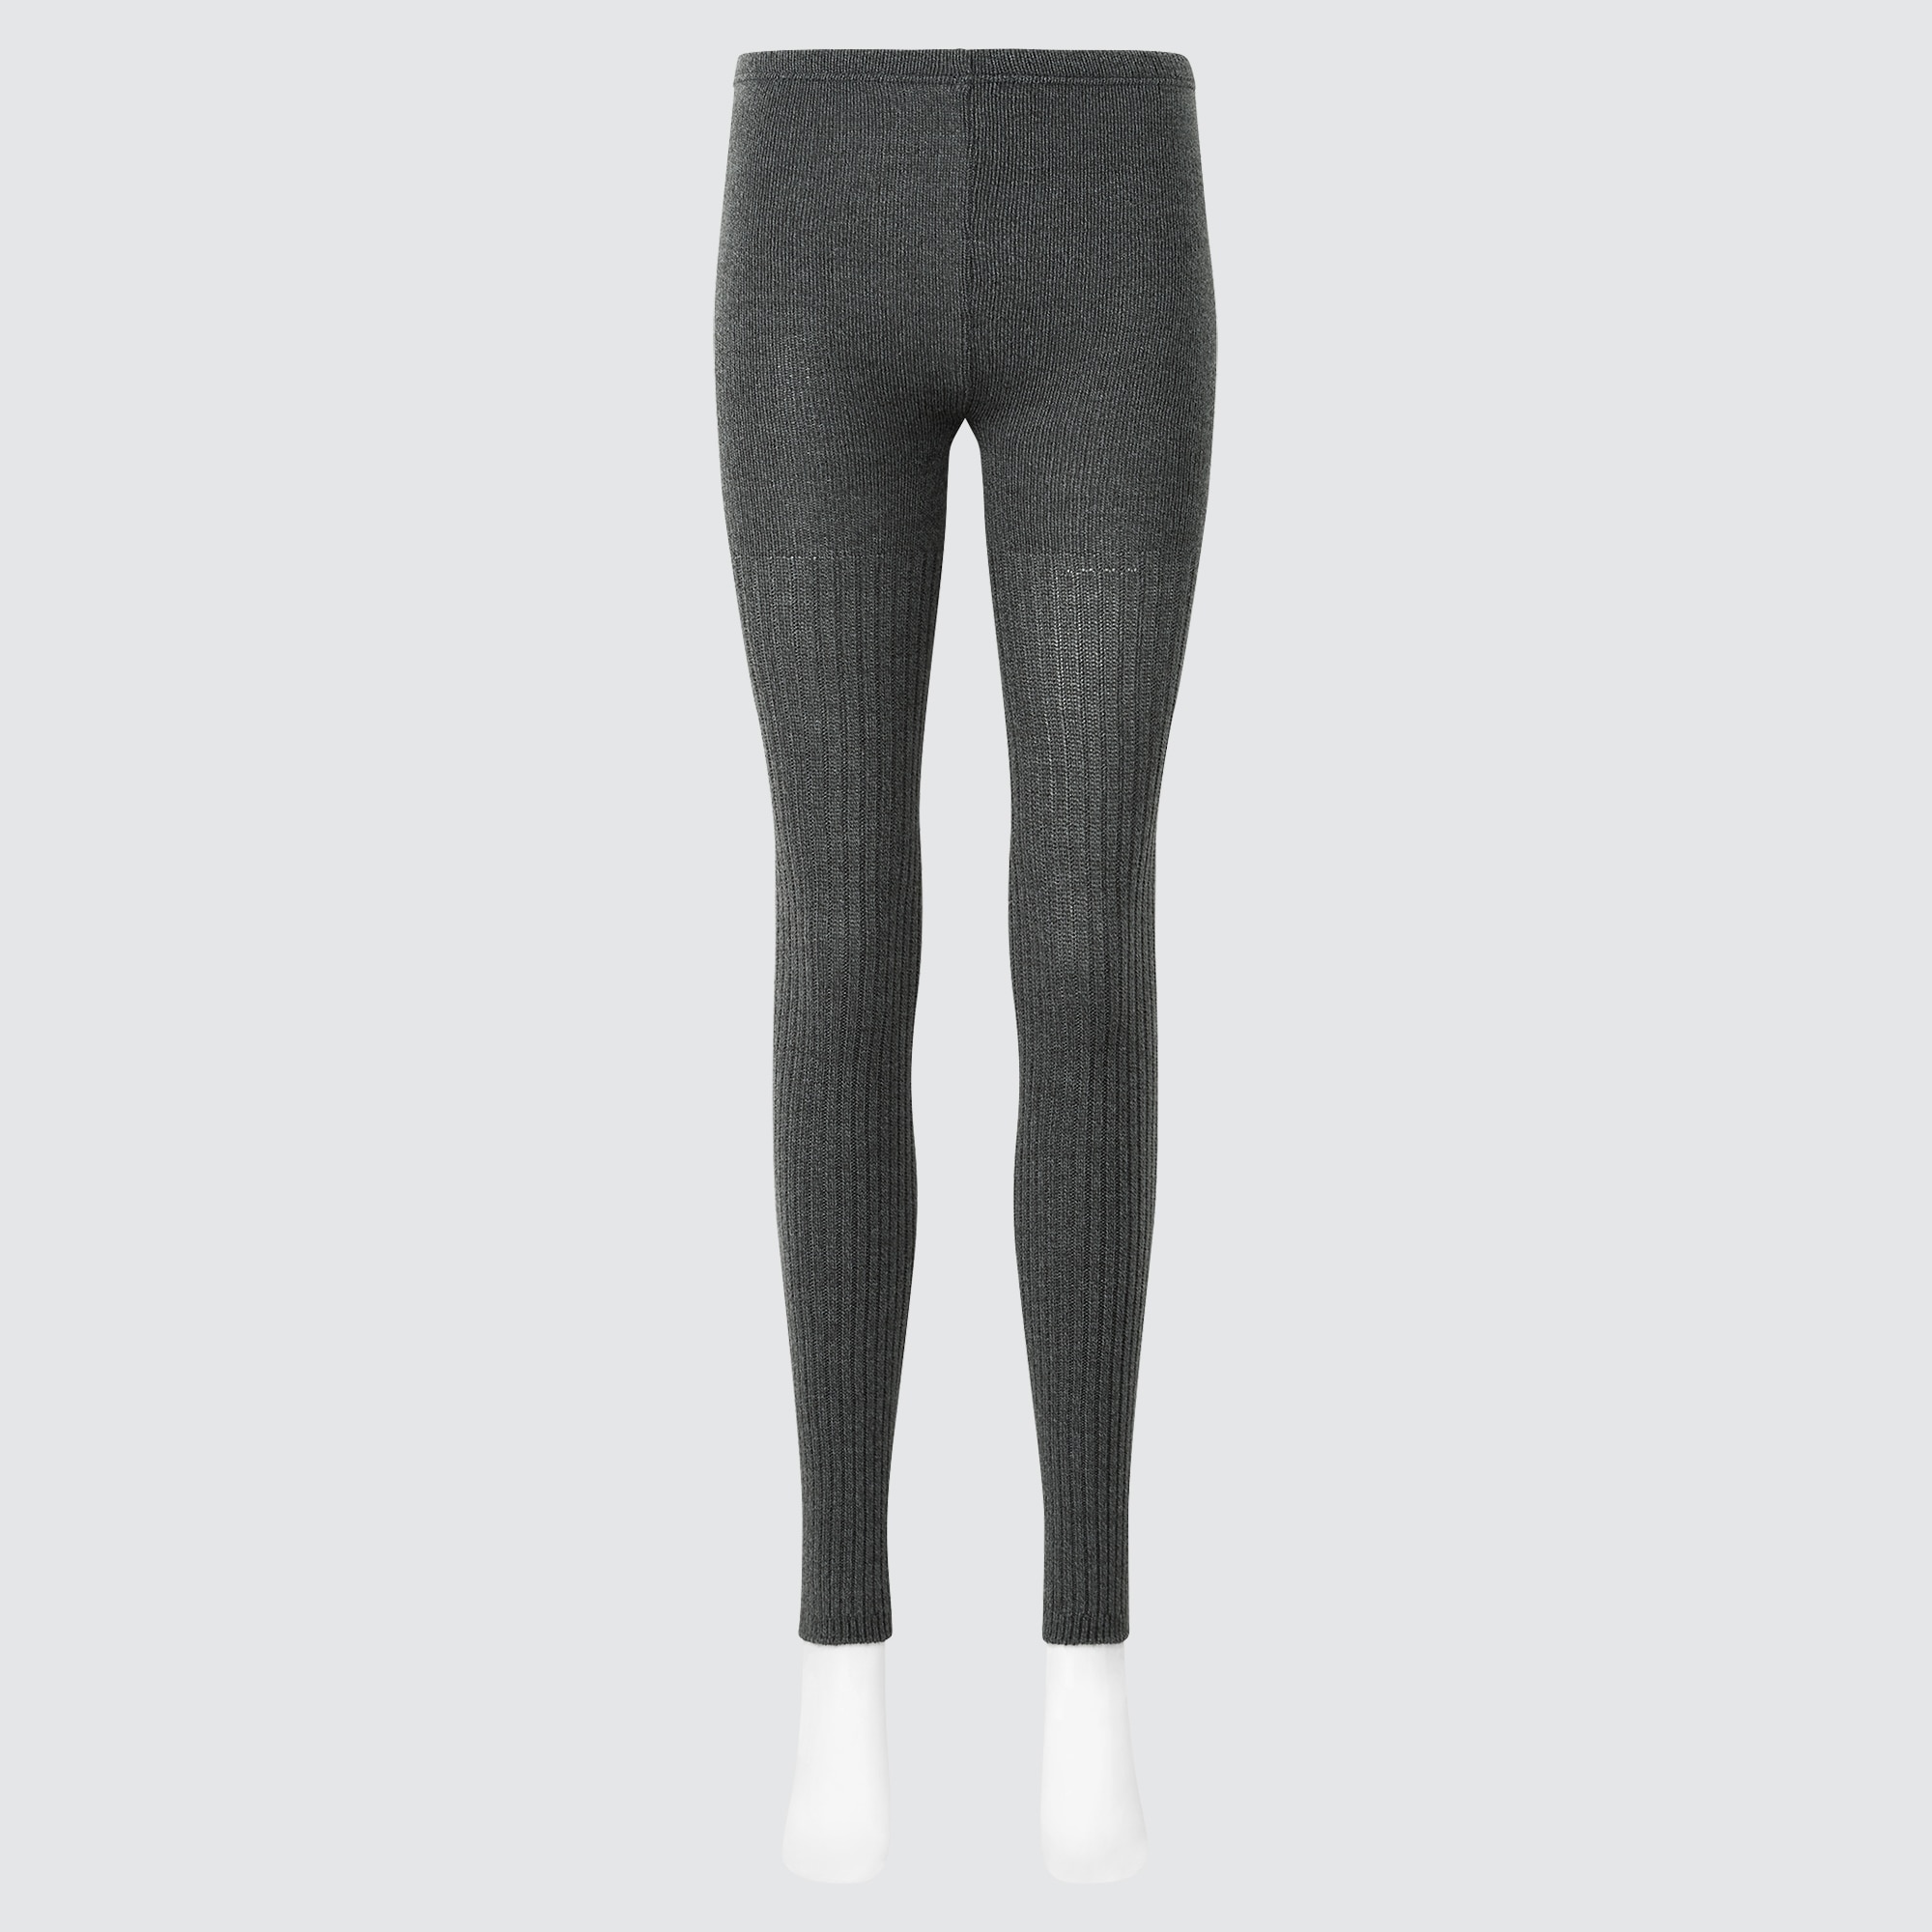 UNIQLO HEATTECH KNITTED TIGHTS (RIBBED)